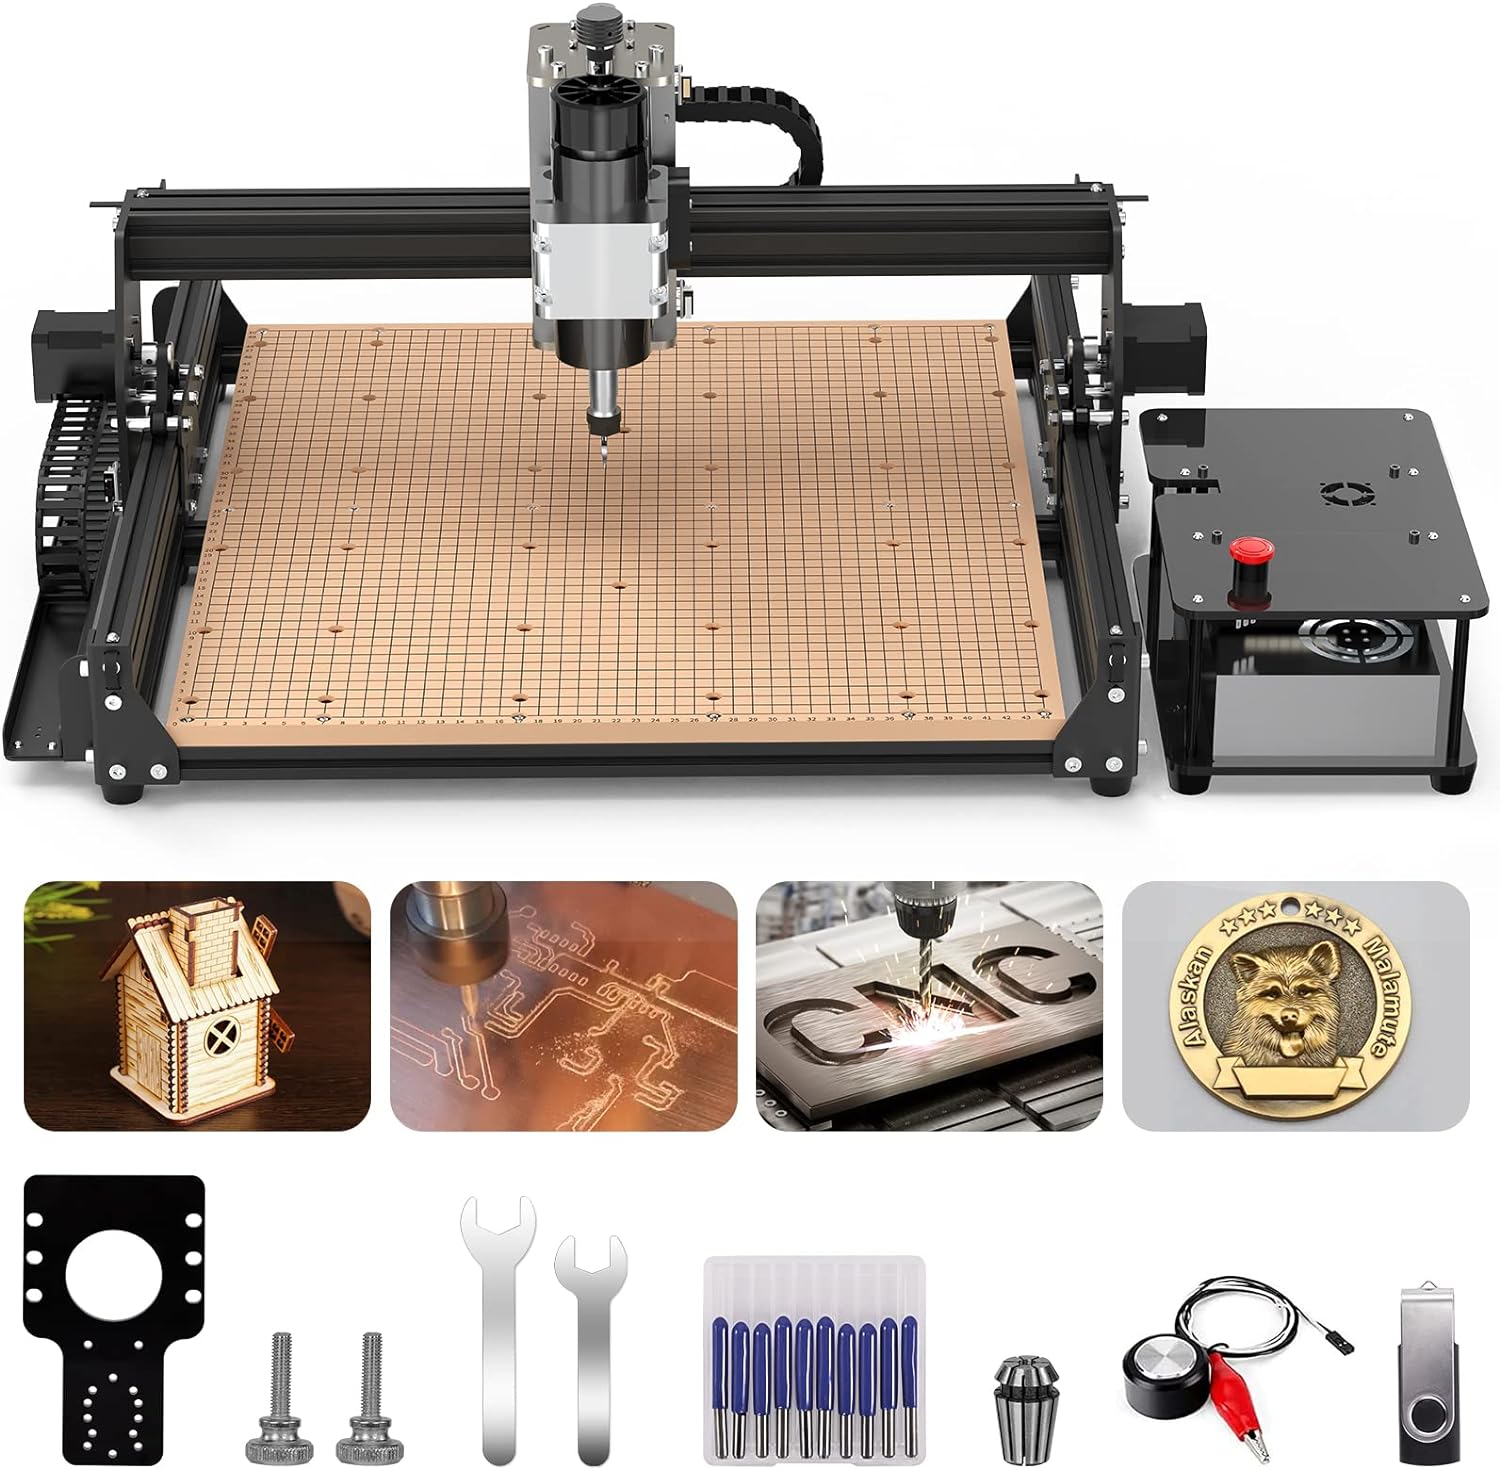 500W CNC Router Machine, 4540 CNC Machine for Metal, 3-Axis Stainless Steel Engraving Milling Machine for Carving Cutting Wood Acrylic PCB MDF Nylon, Working Area 430x390x90mm (16.9x15.4x3.5”)